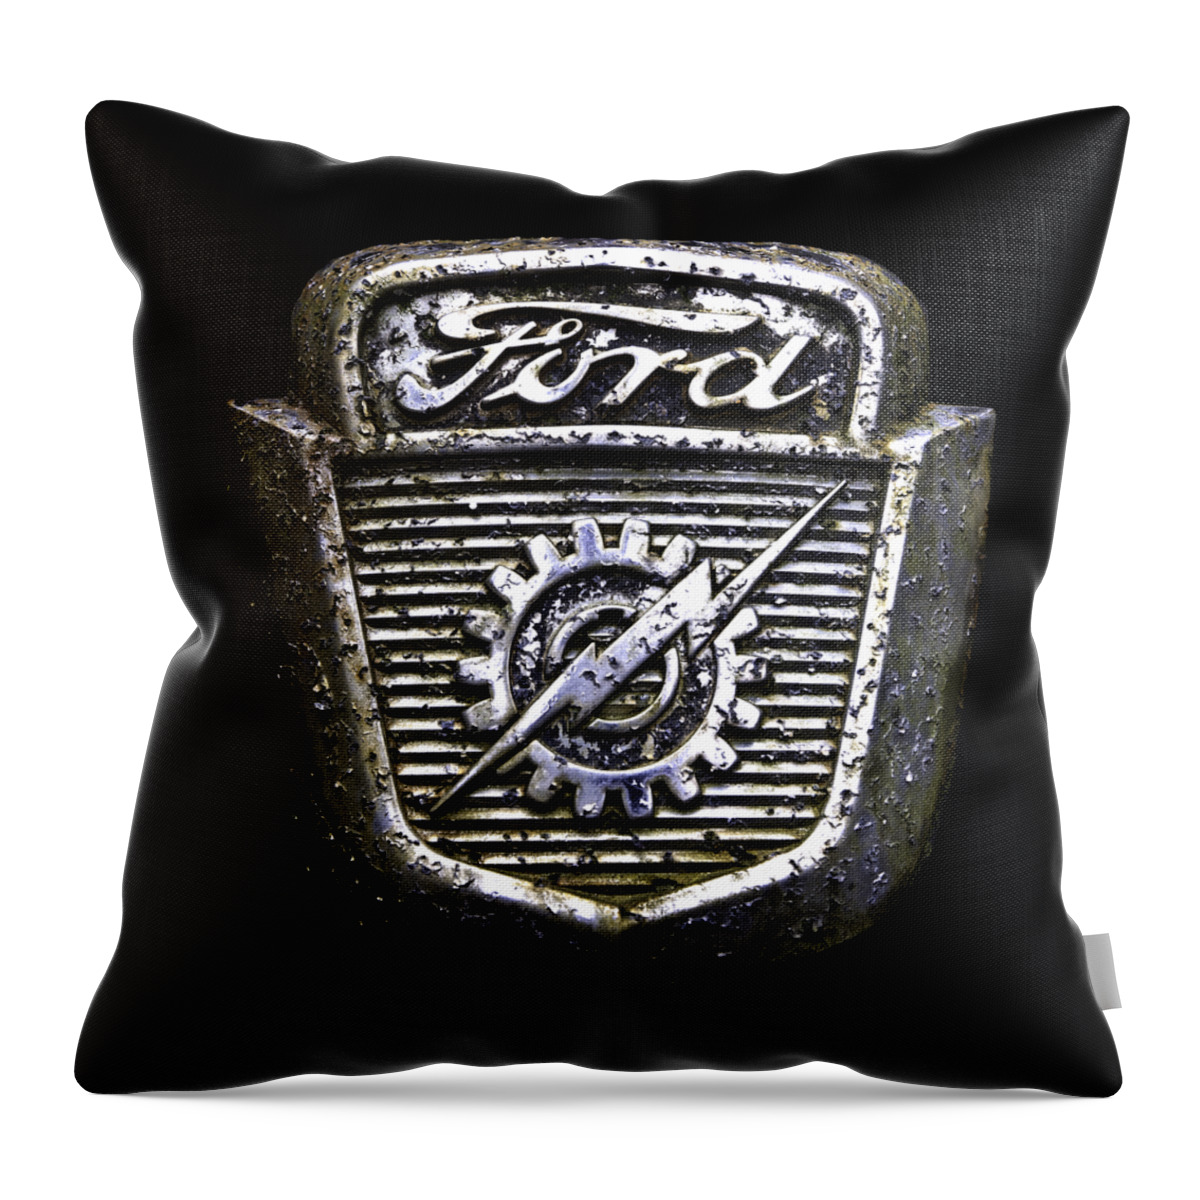 Ford Throw Pillow featuring the photograph Ford Emblem by Debra and Dave Vanderlaan